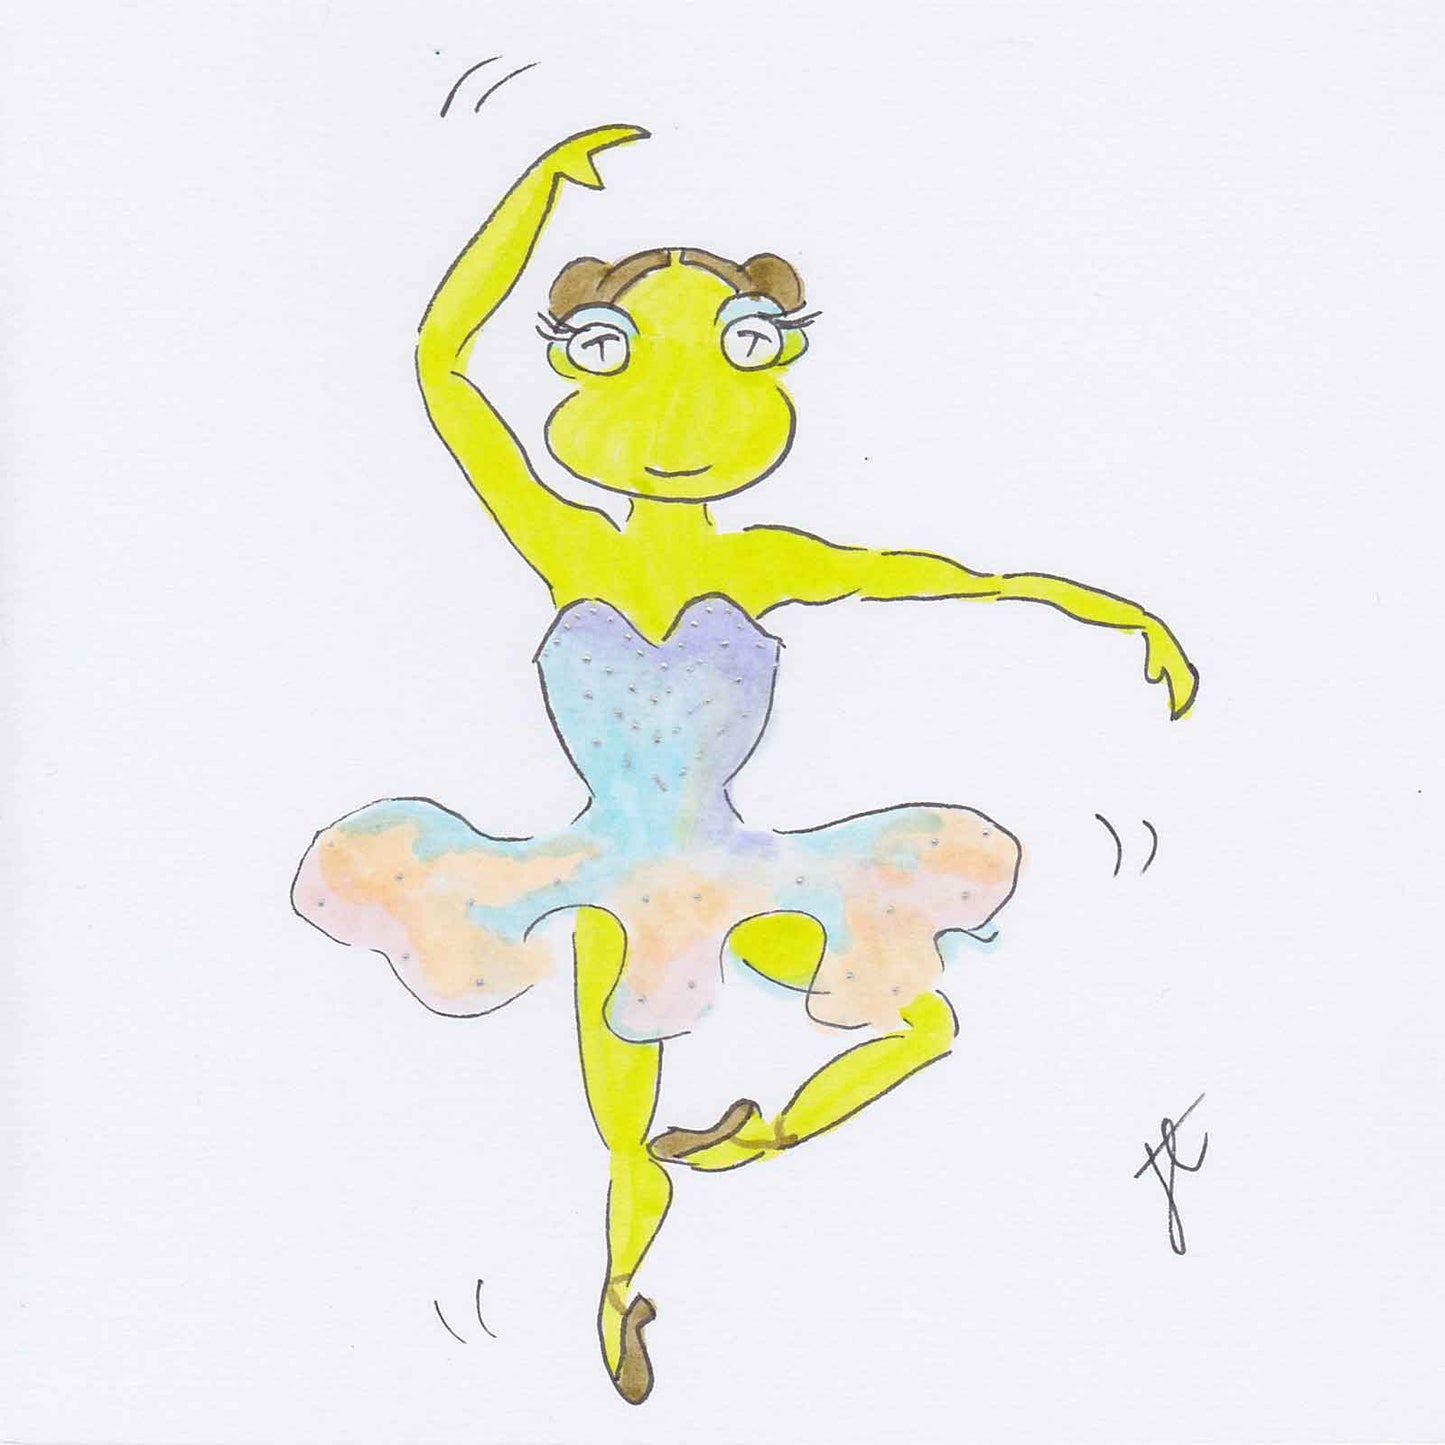 Ballettoons Lily illustration of dancing frog poised mid pirouette in tutu